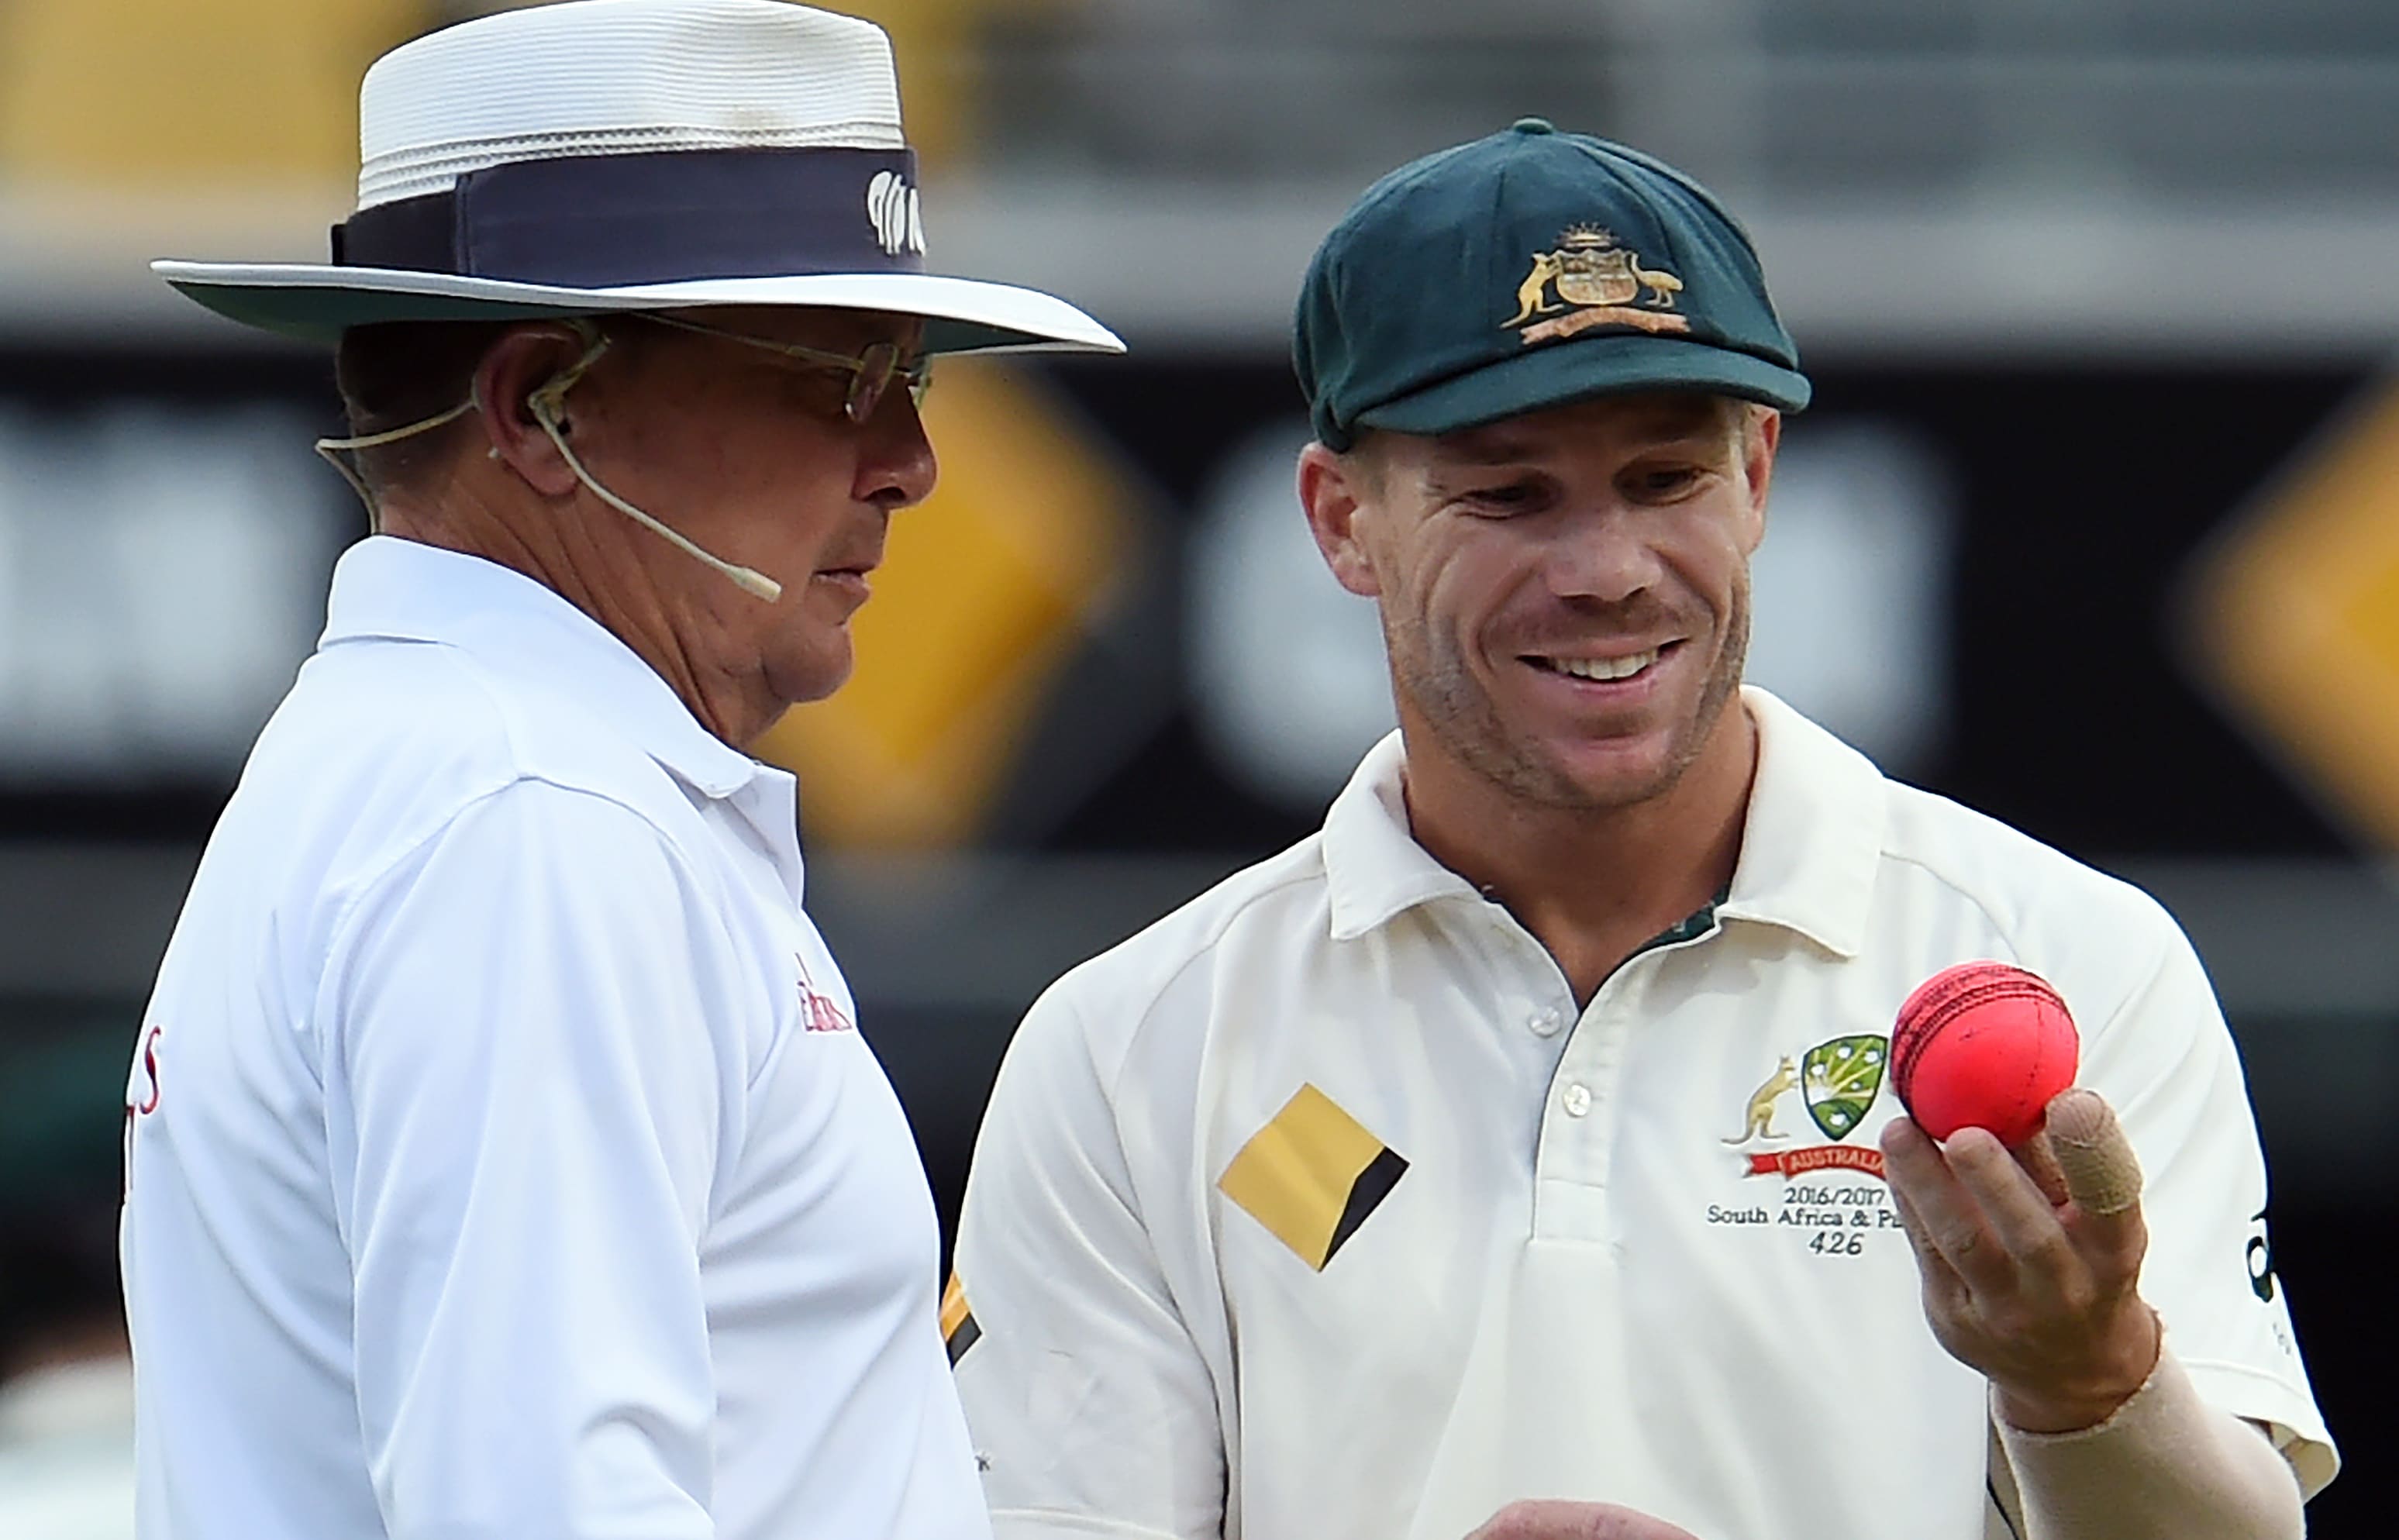 Australia's fielder David Warner (right0 discusses the ball's shape with umpire Ian Gould during a test match between Australia and Pakistan 2016.